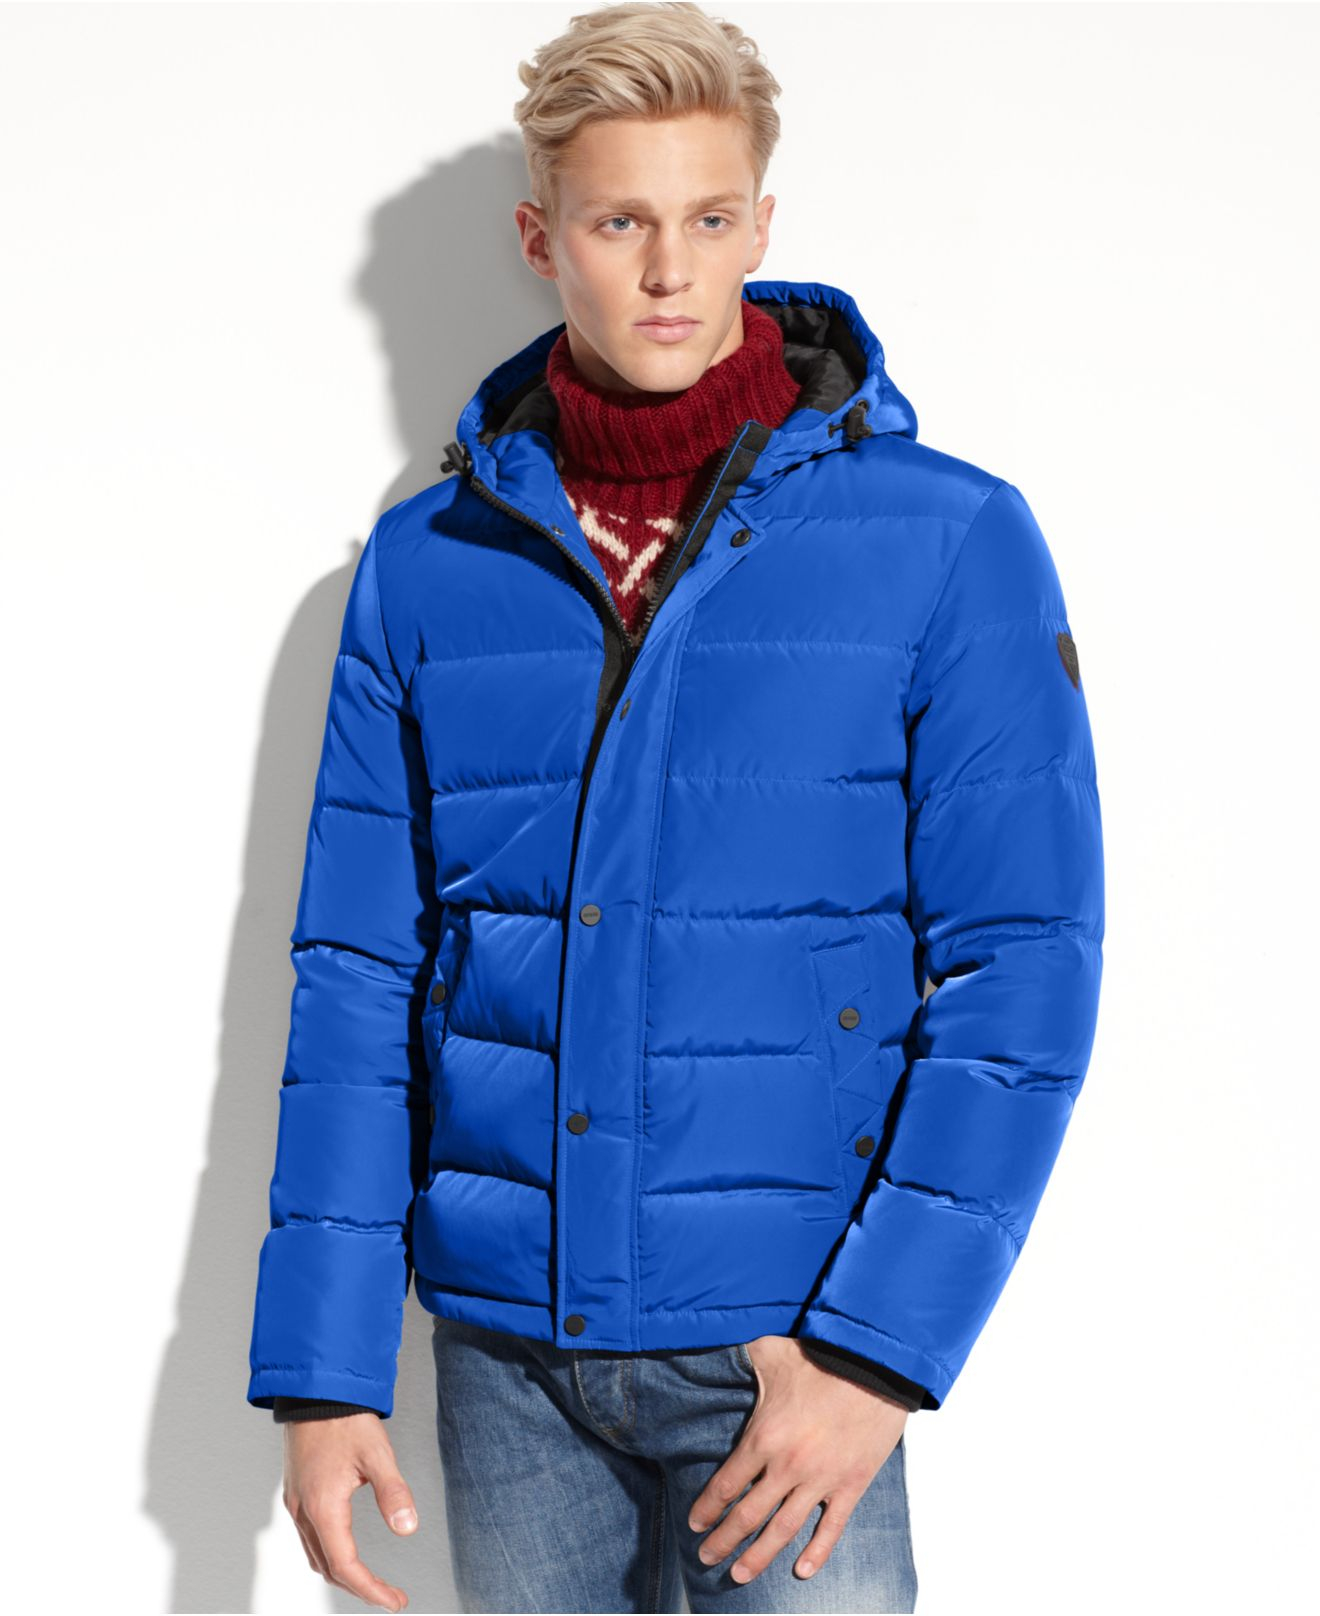 Lyst - Guess Hooded Down Performance Puffer in Blue for Men